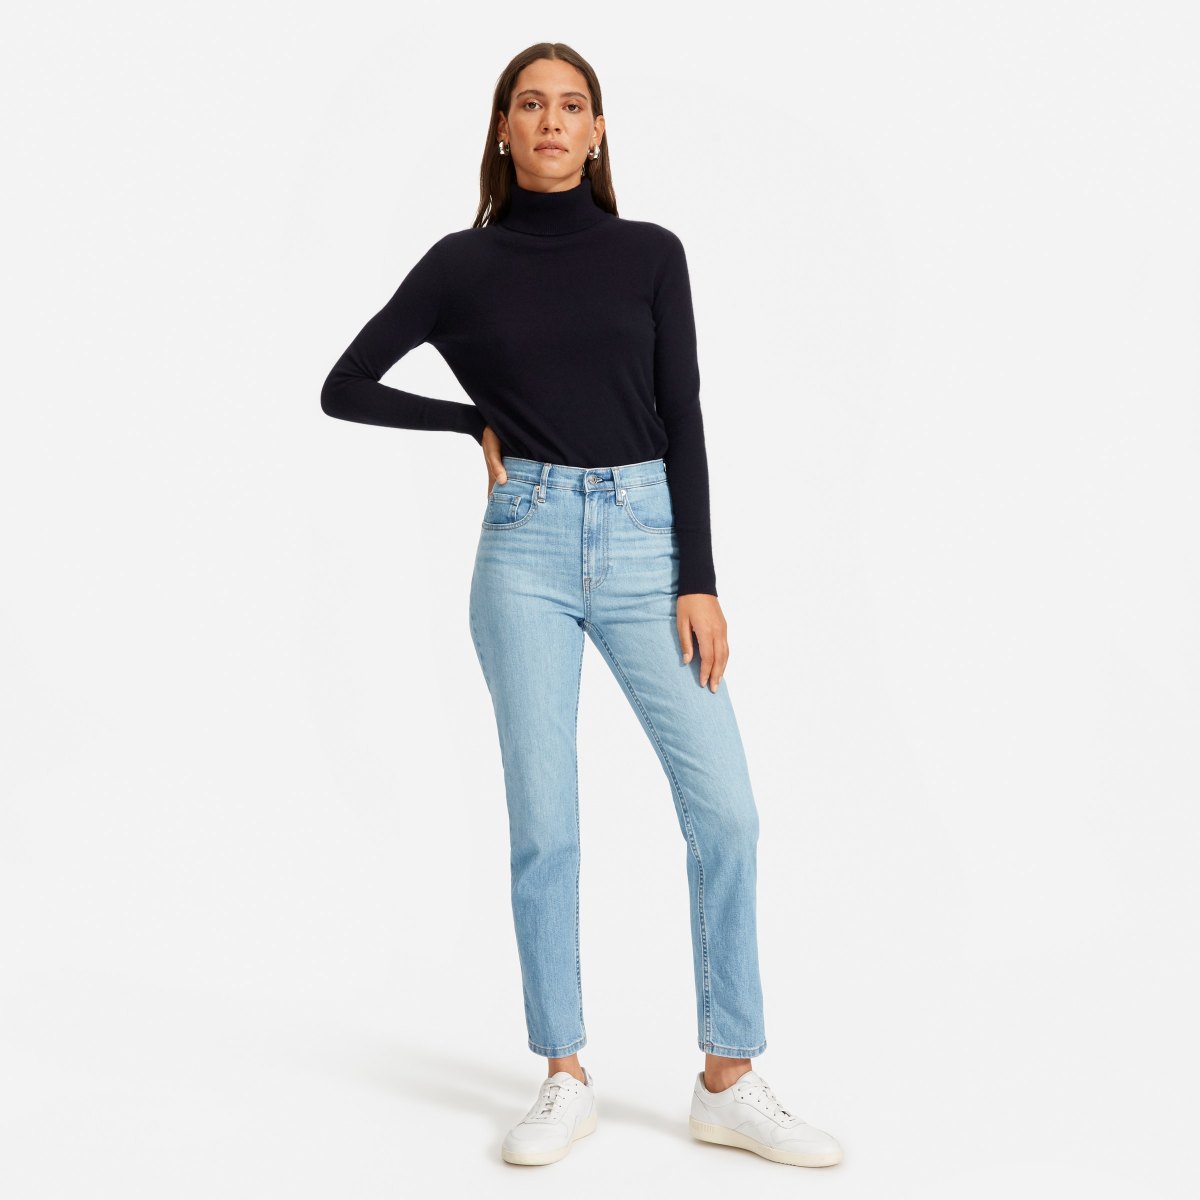 Everlane Bestselling Jeans Are Just $50 — This Week Only! | Us Weekly